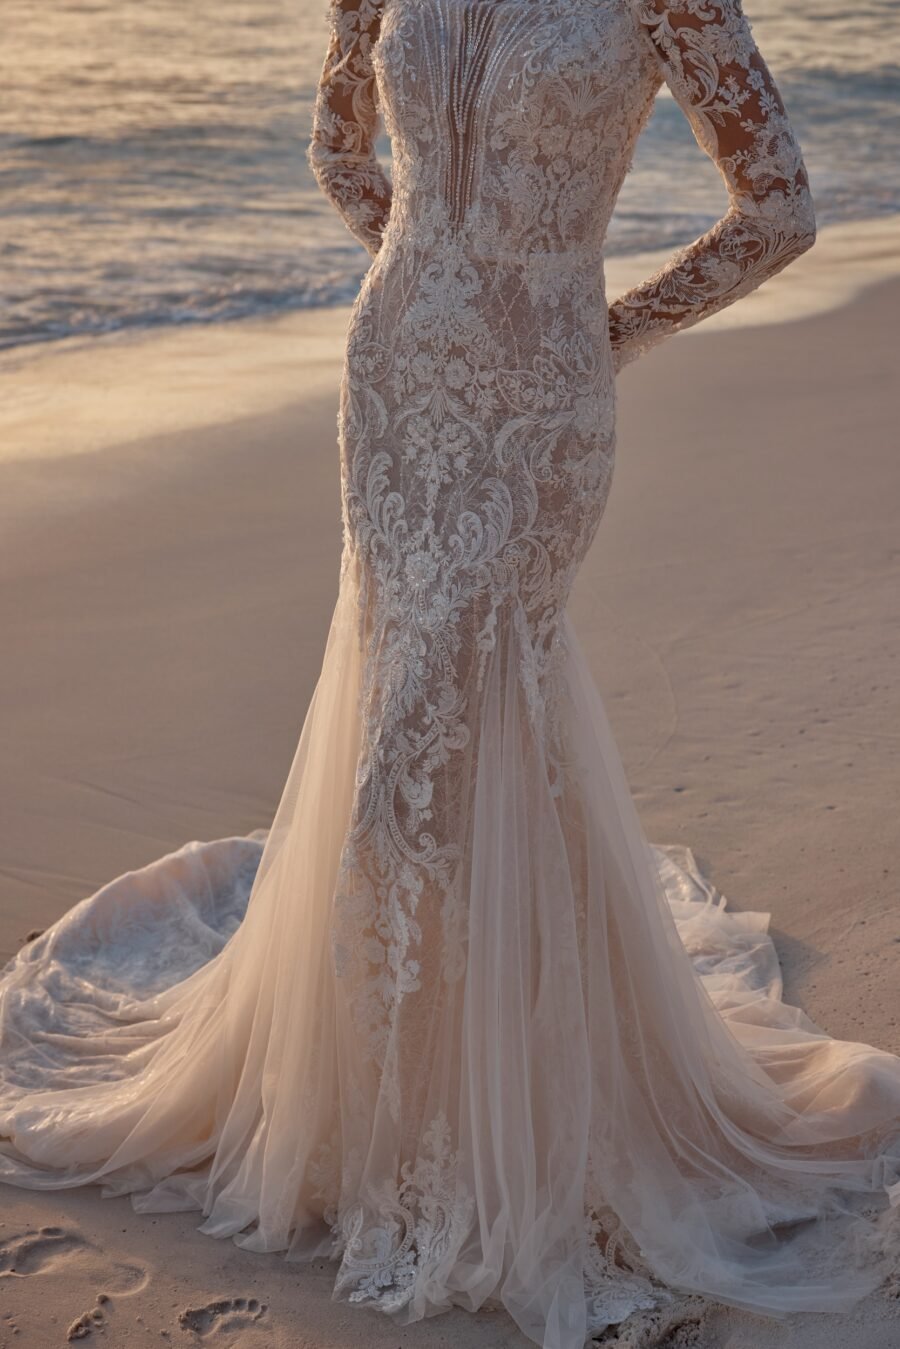 West 3 wedding dress by woná concept from atelier signature collection